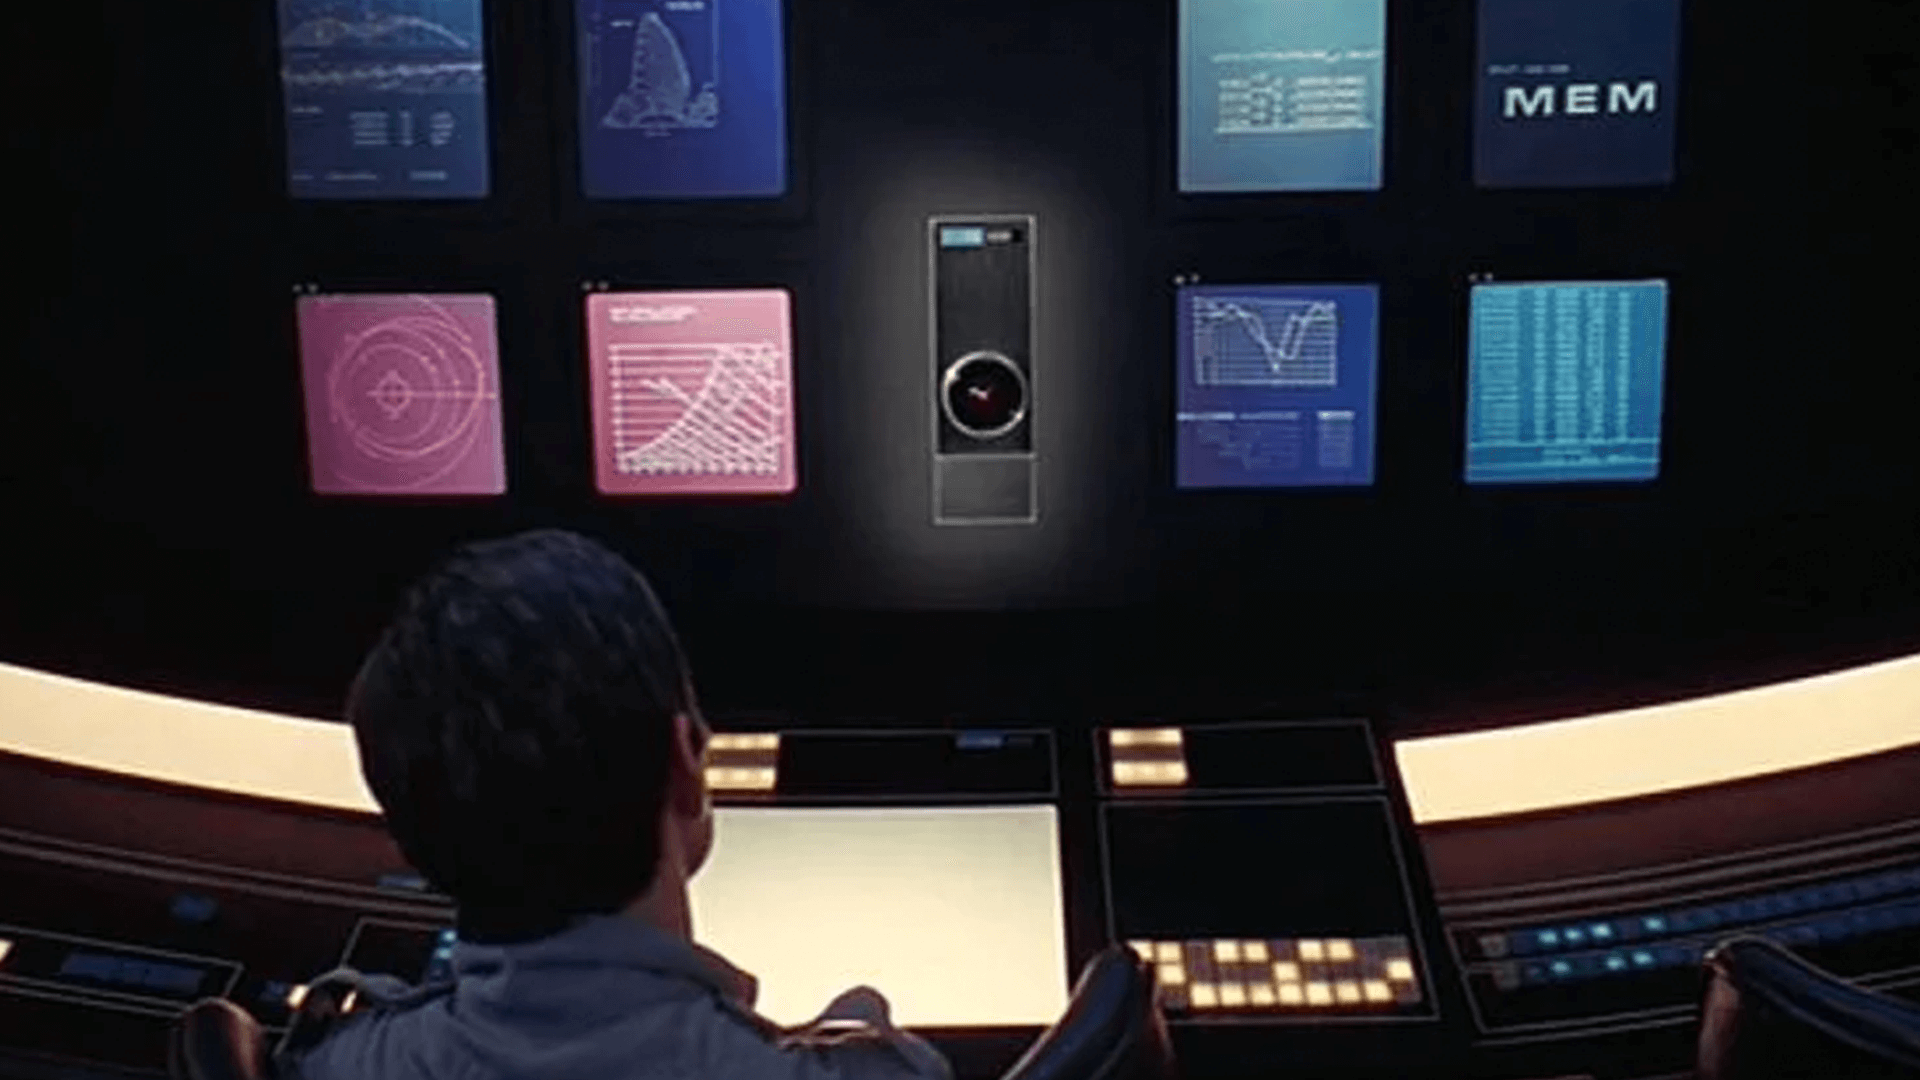 HAL9000 from 2001: A Space Odyssey